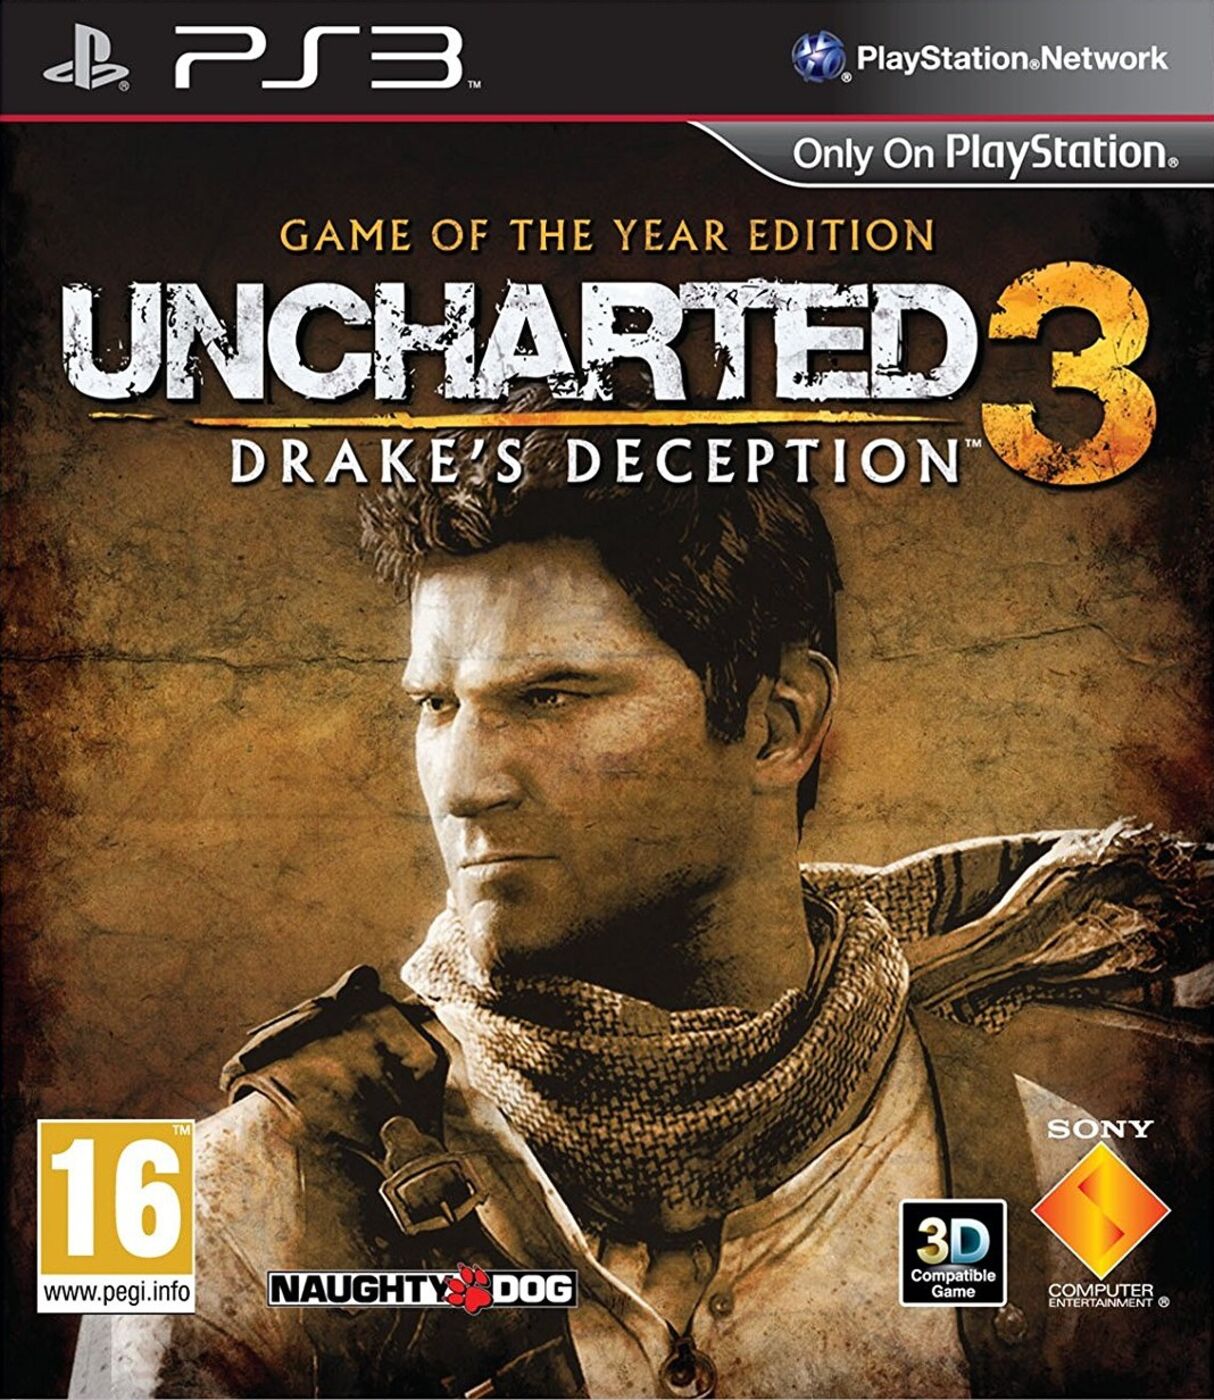 uncharted 3 pc reworked games